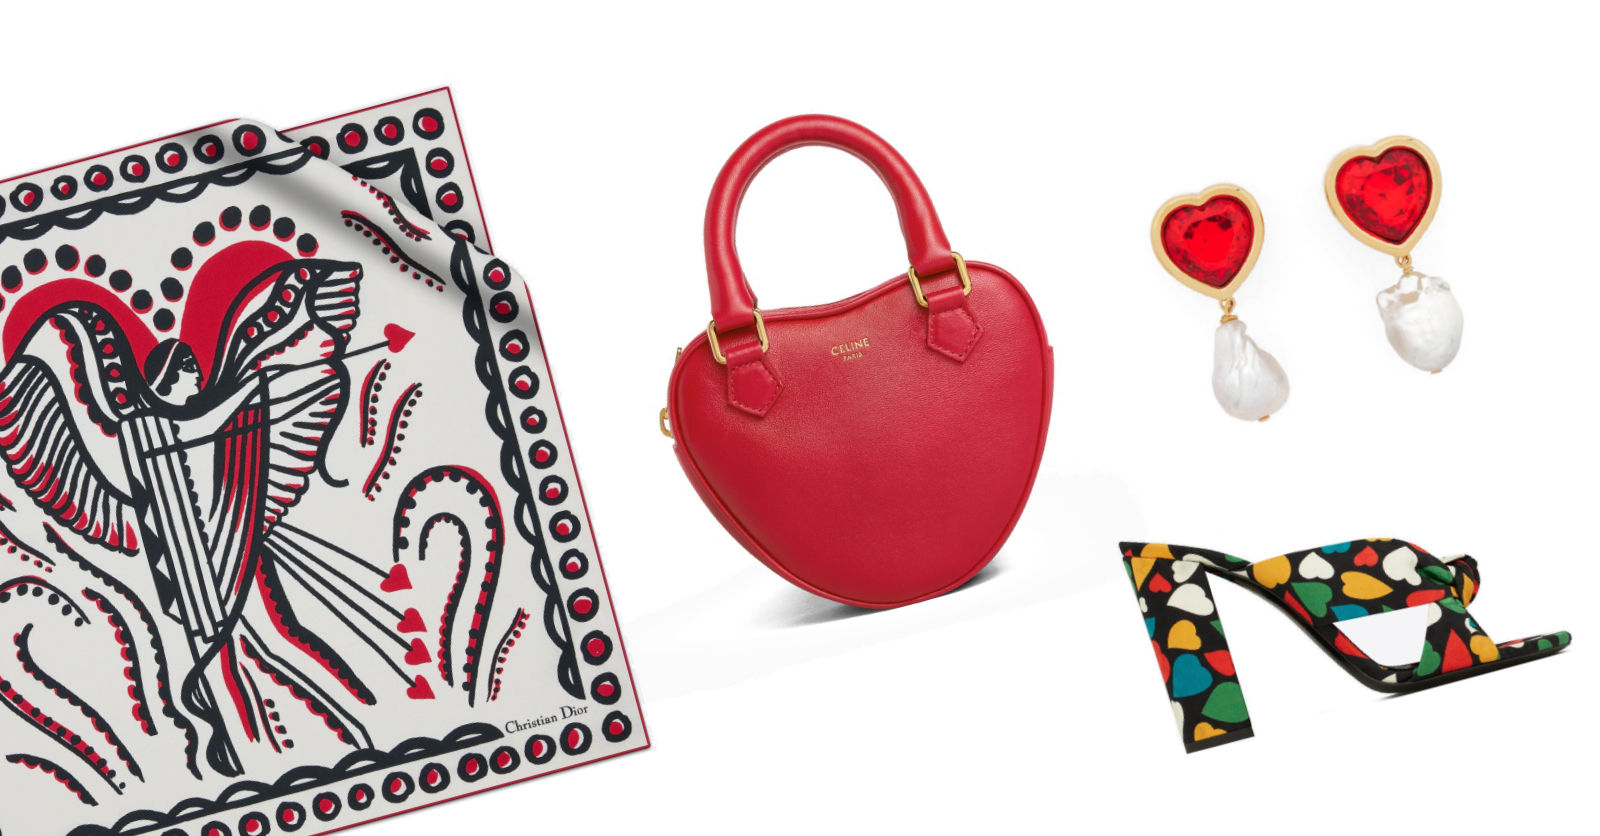 2010 Valentine's Day gift ideas for men and women from Louis Vuitton